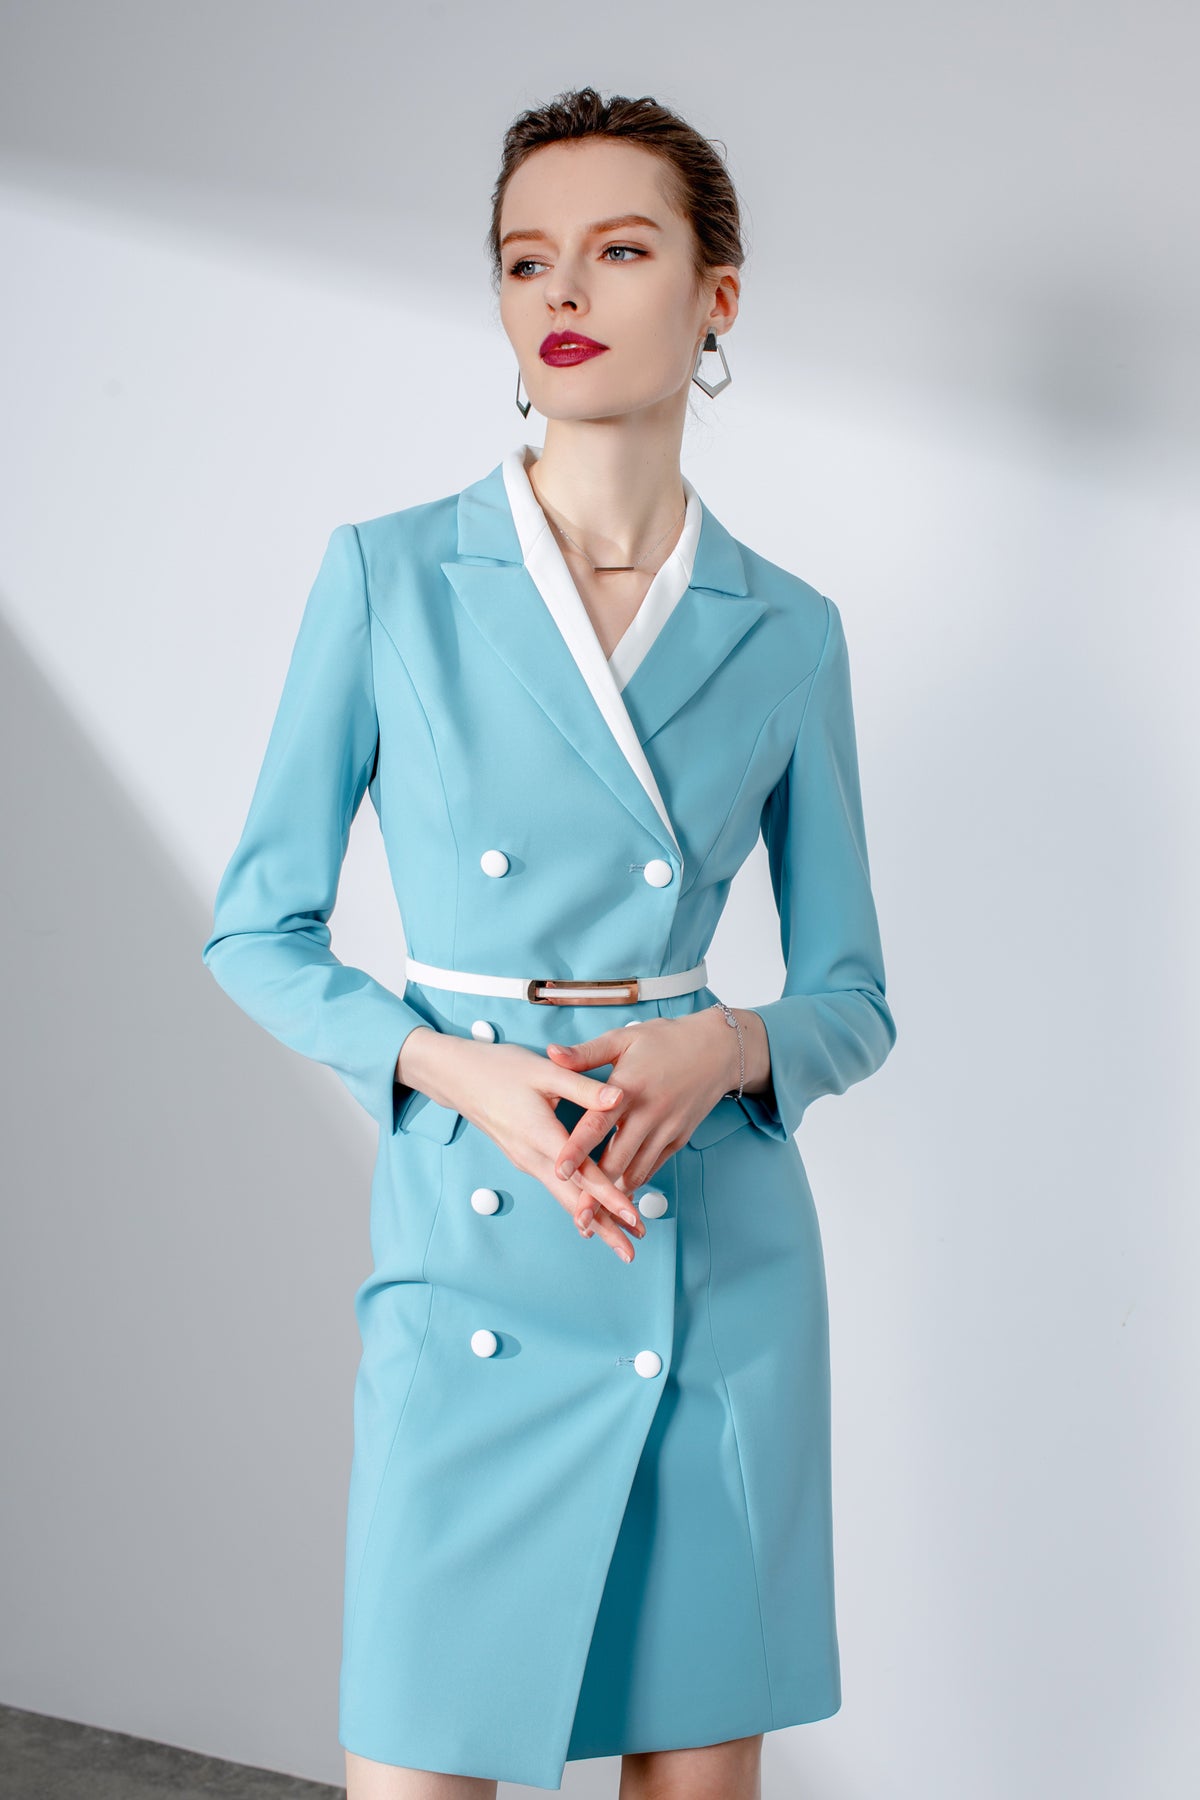 Turquoise Belted Blazer Dress | Royal Ascot outfits – Meliora